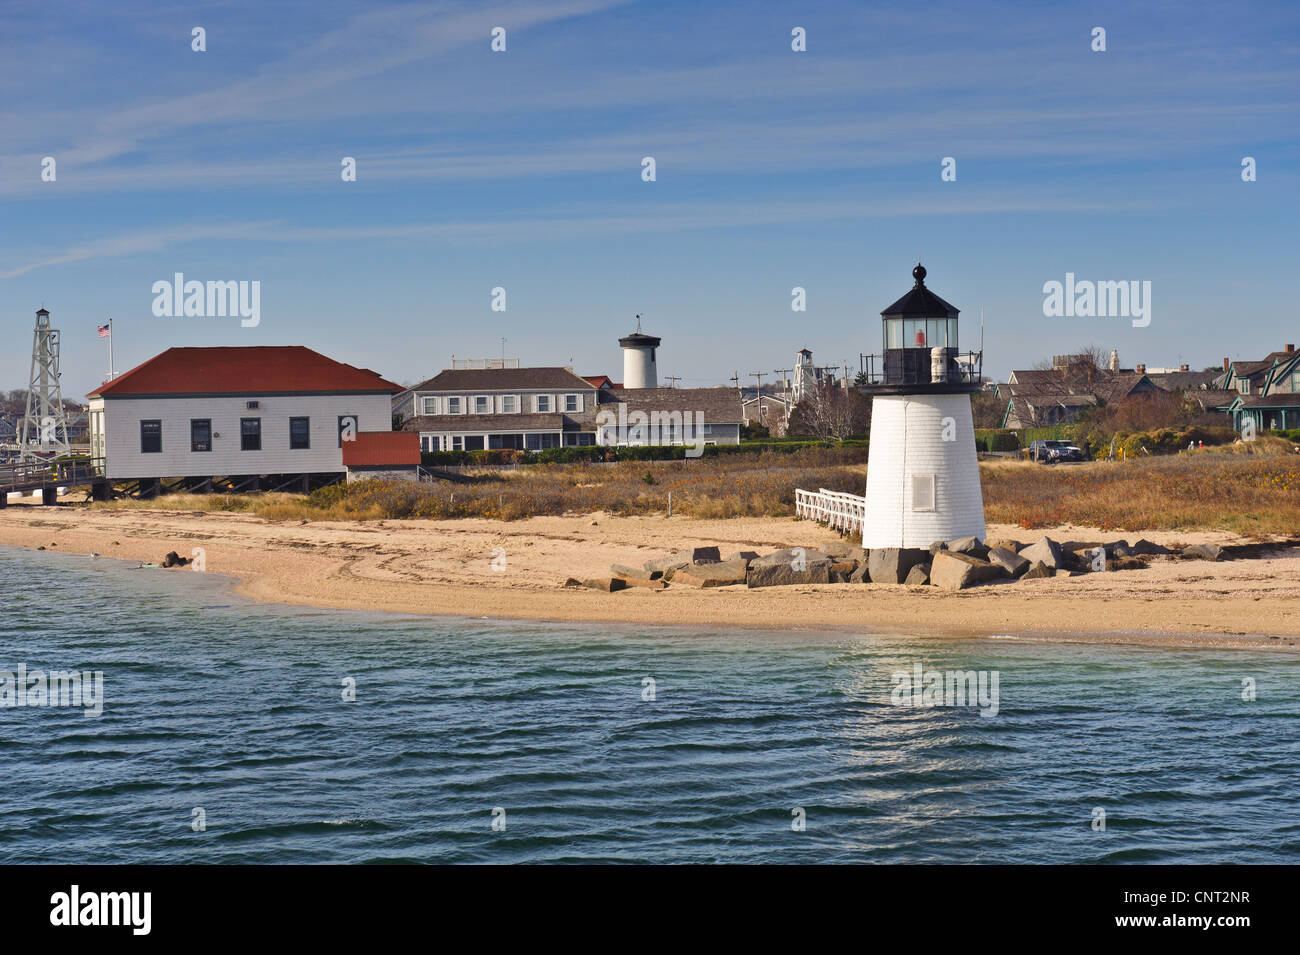 Brant Point Lighthouse at the entrance to Nantucket Harbor The 26 foot tall white wooden lighthouse is the lowest in New England Stock Photo